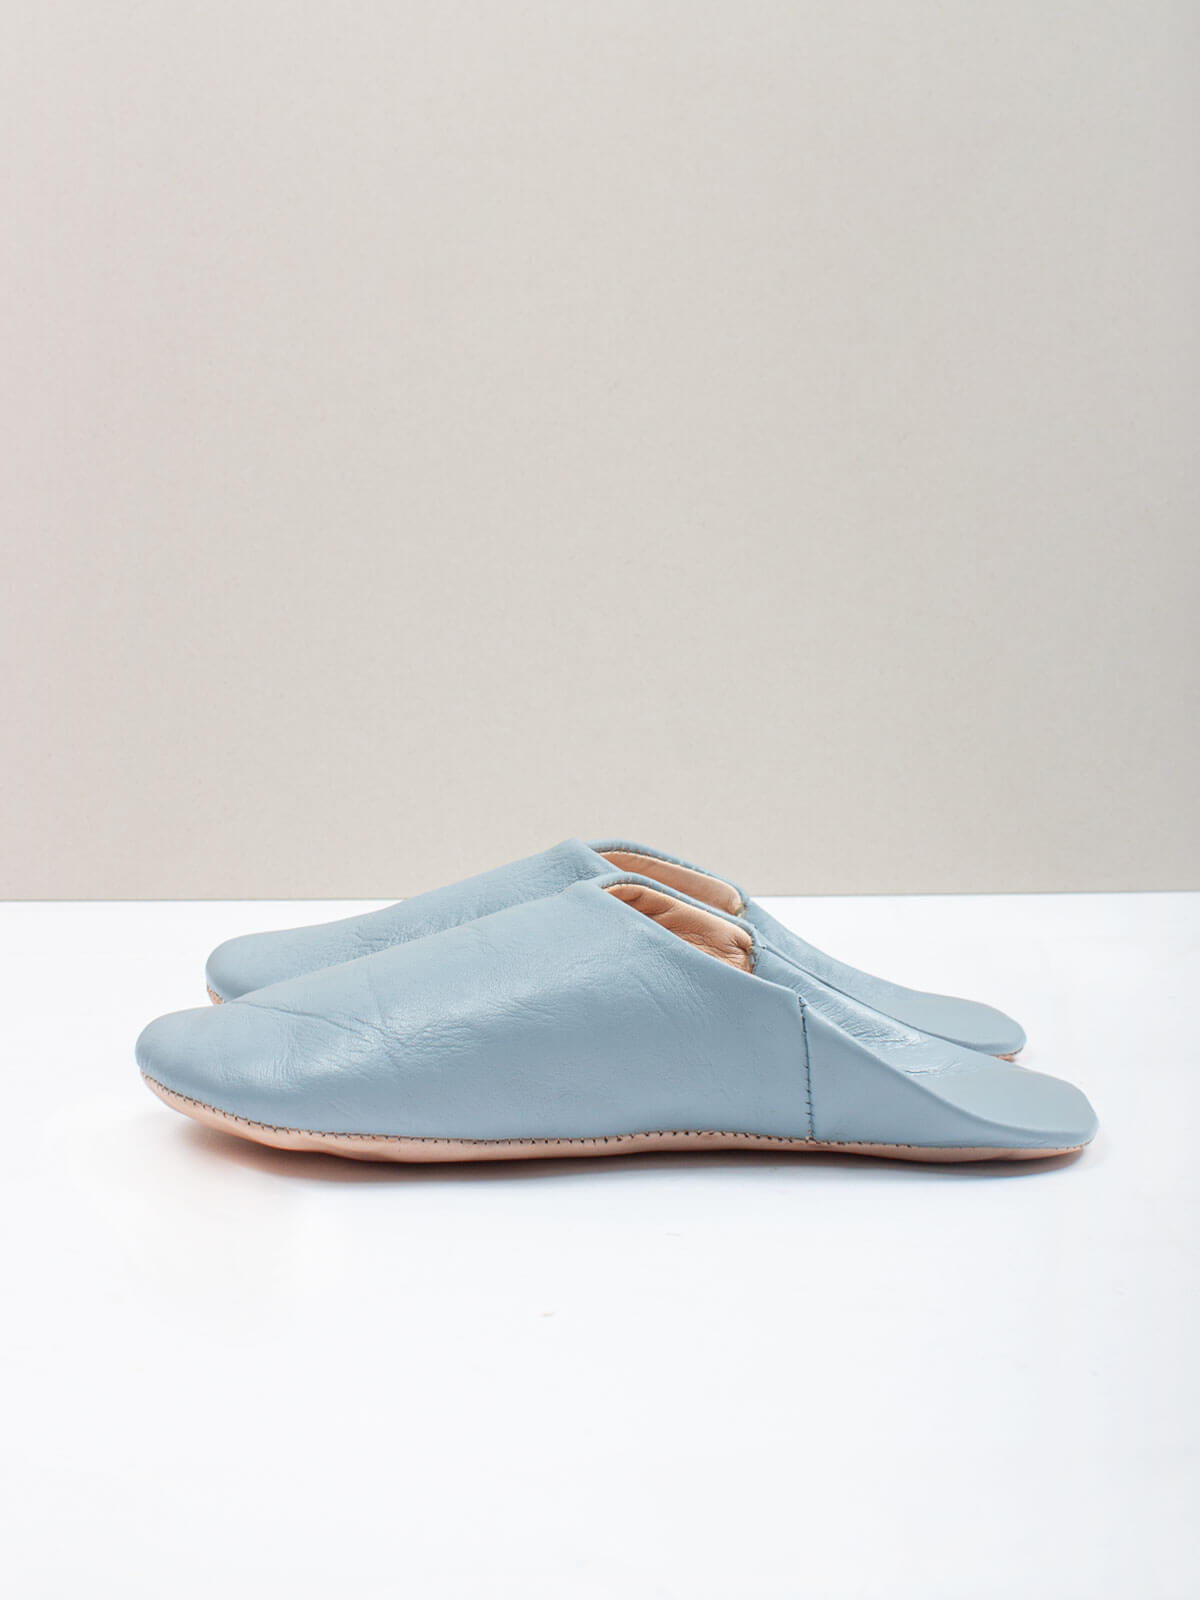 Moroccan Pearl grey leather mule slippers